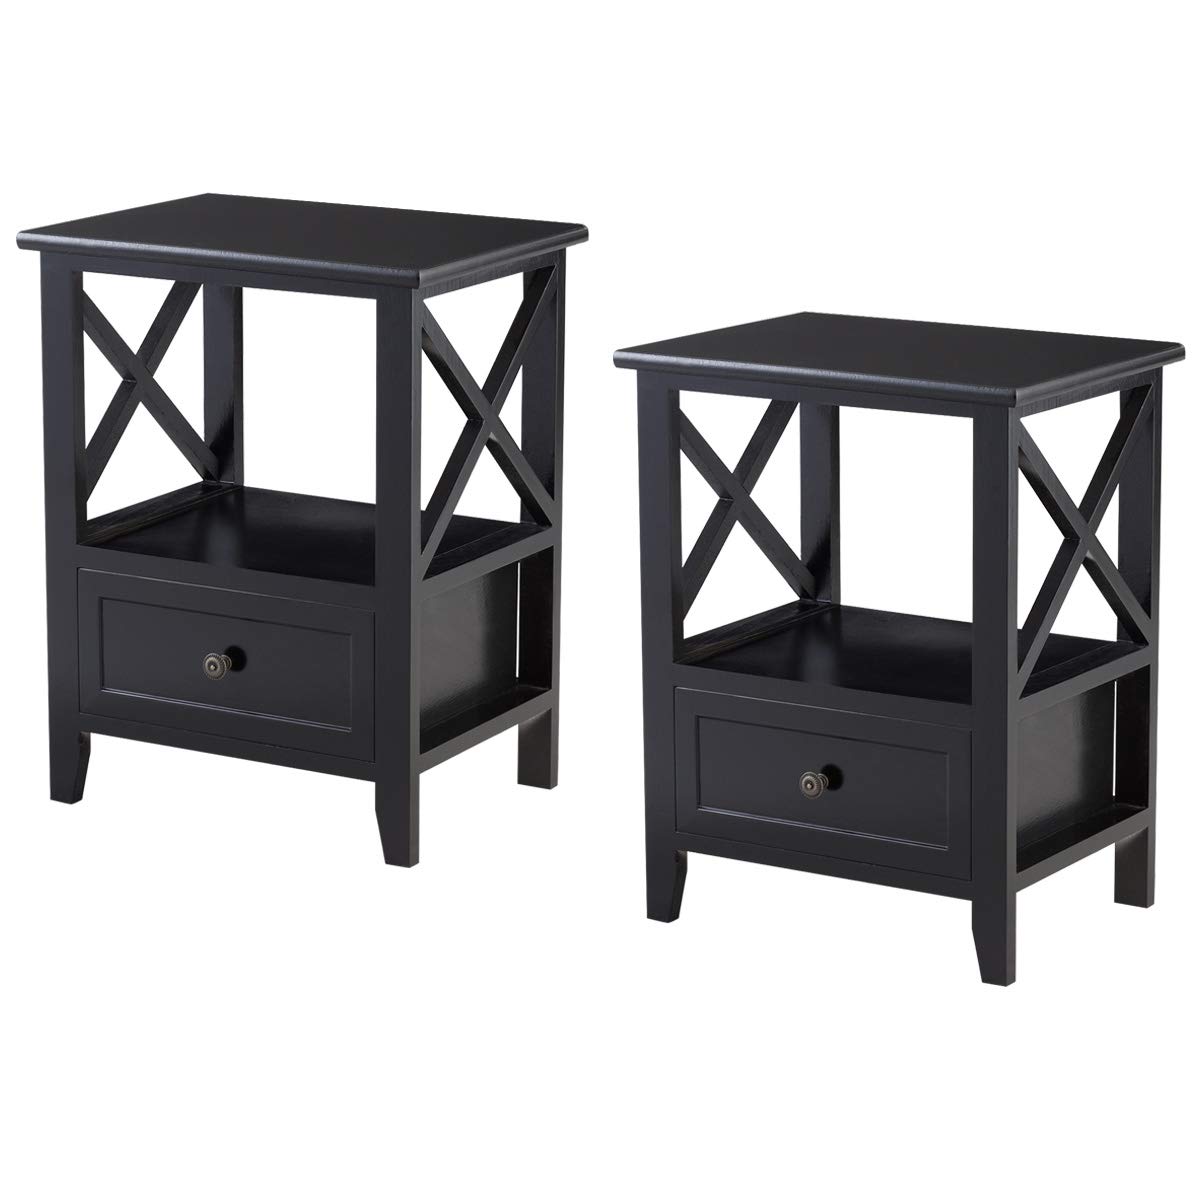 giantex nightstand set end tables storage shelf exxl coffee table and black wooden drawer for living room bedroom bedside accent home furniture side wicker basket painted paint